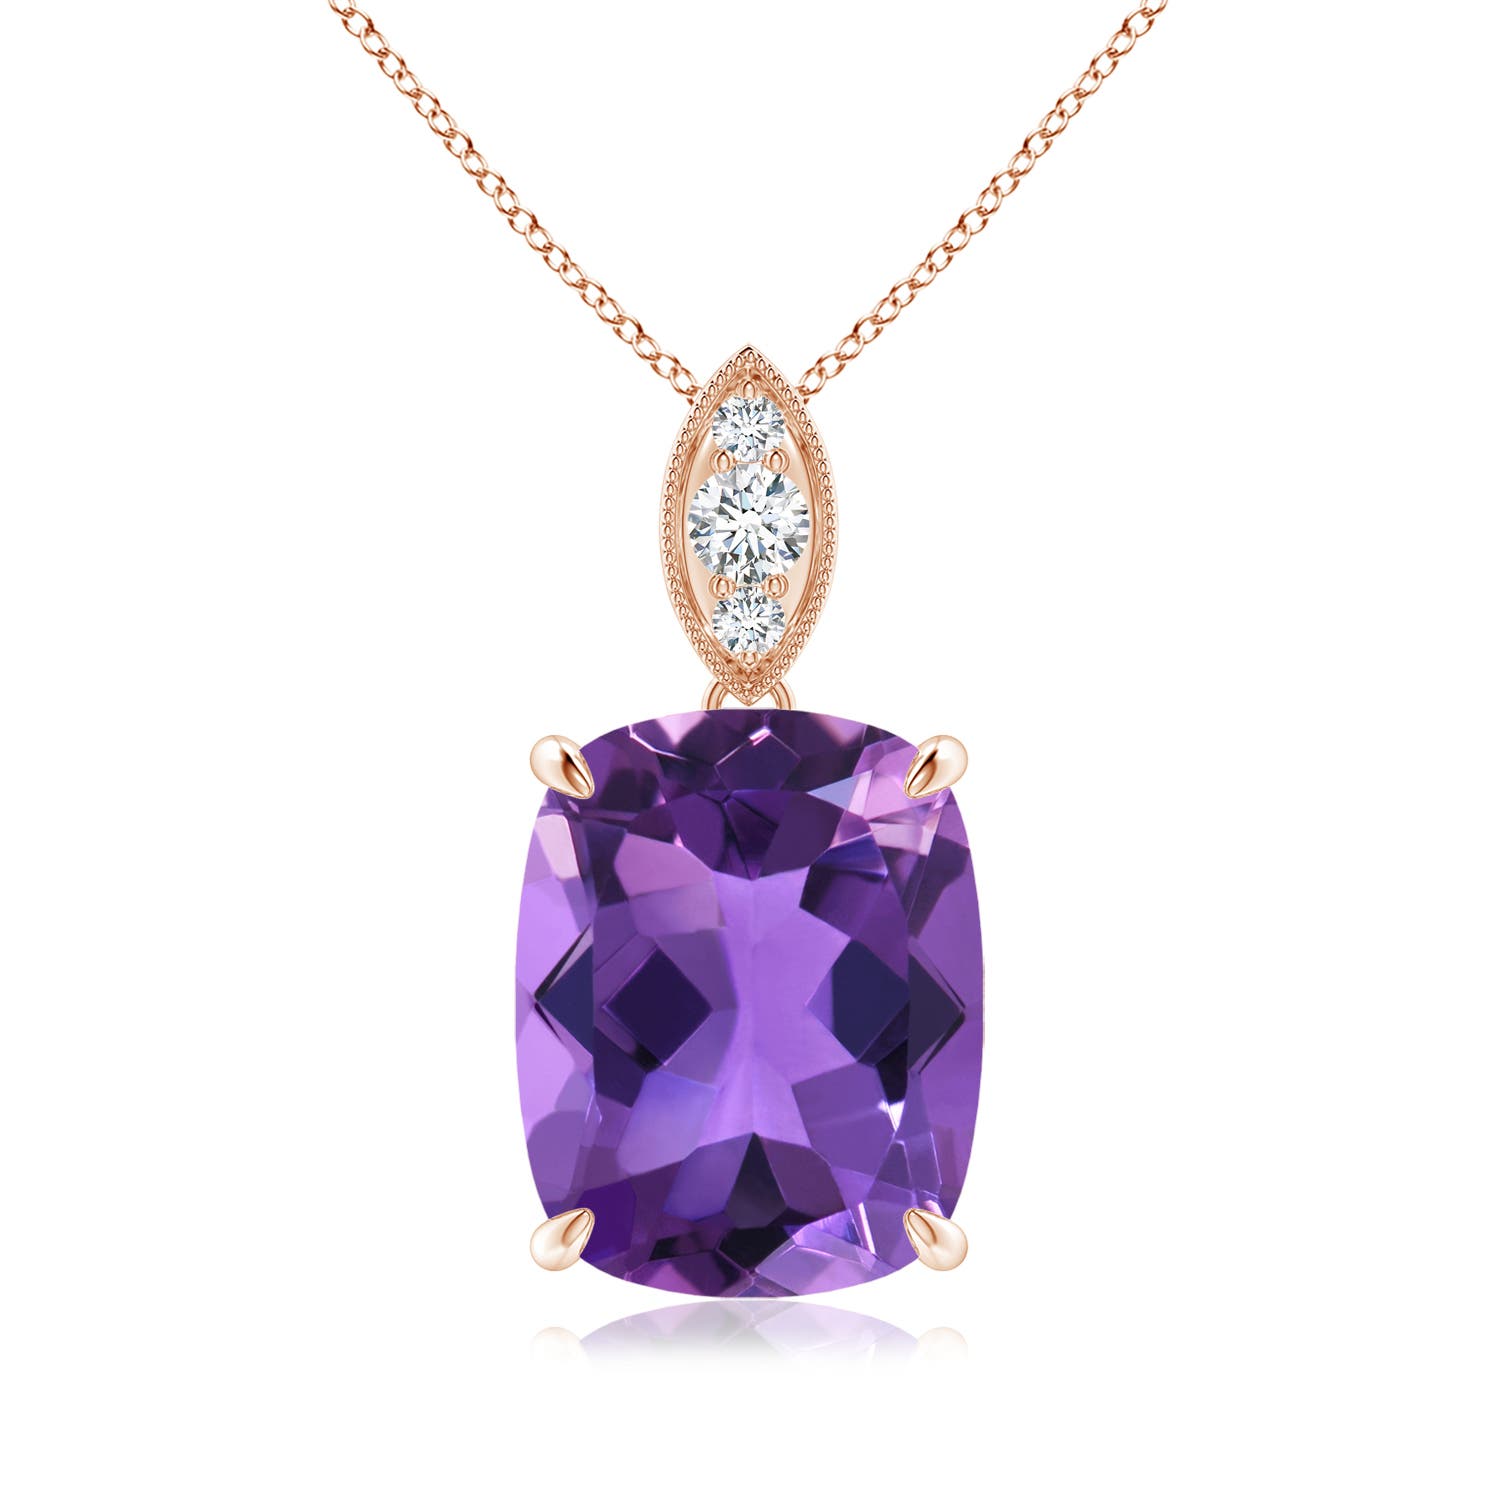 AAA - Amethyst / 3.57 CT / 14 KT Rose Gold